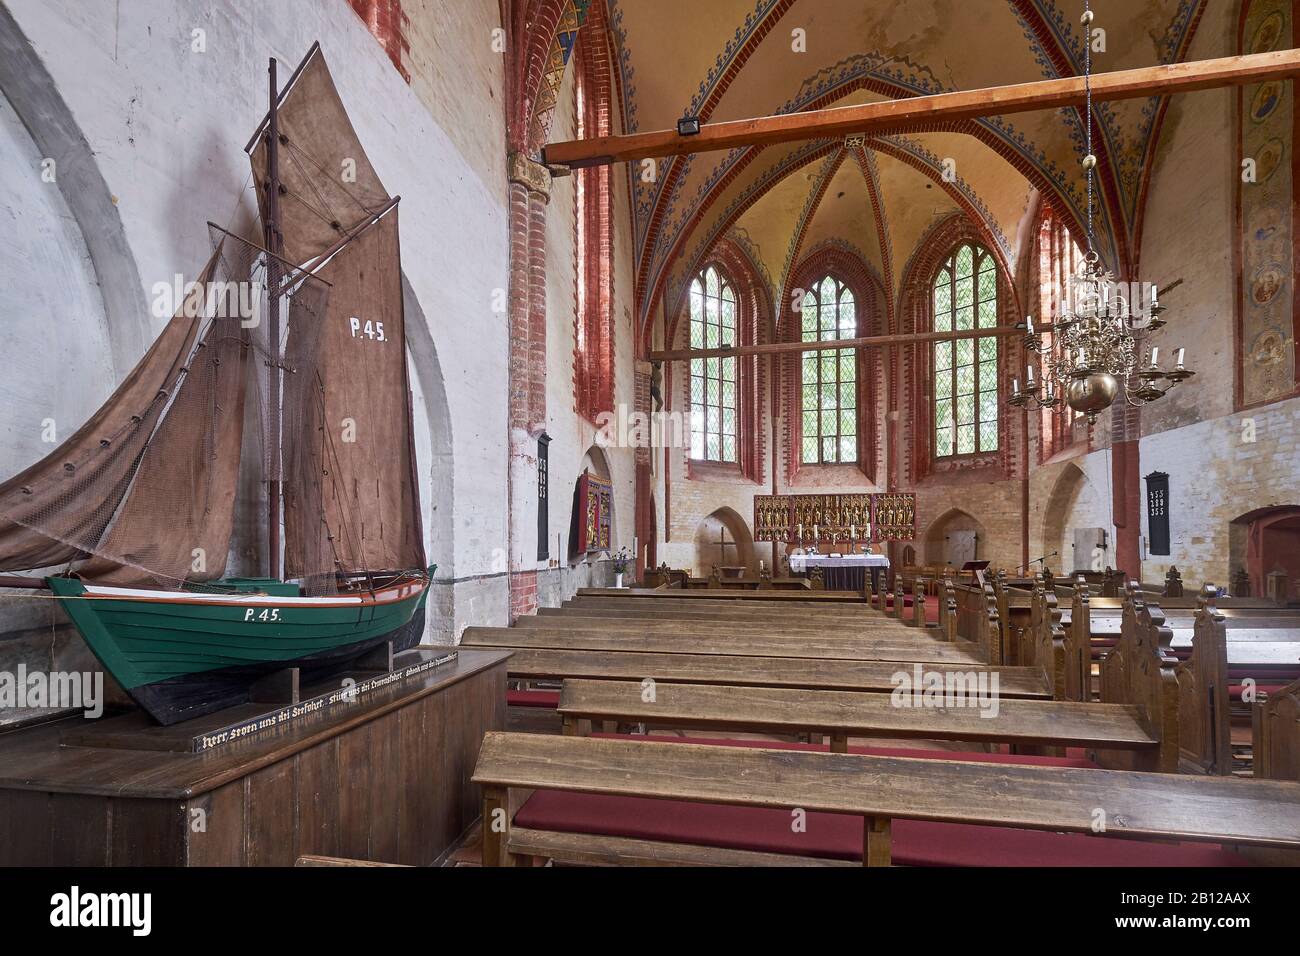 Inside view of the church with Zeesenboot in Kirchdorf, Insel Poel, Mecklenburg-Vorpommern, Germany Stock Photo